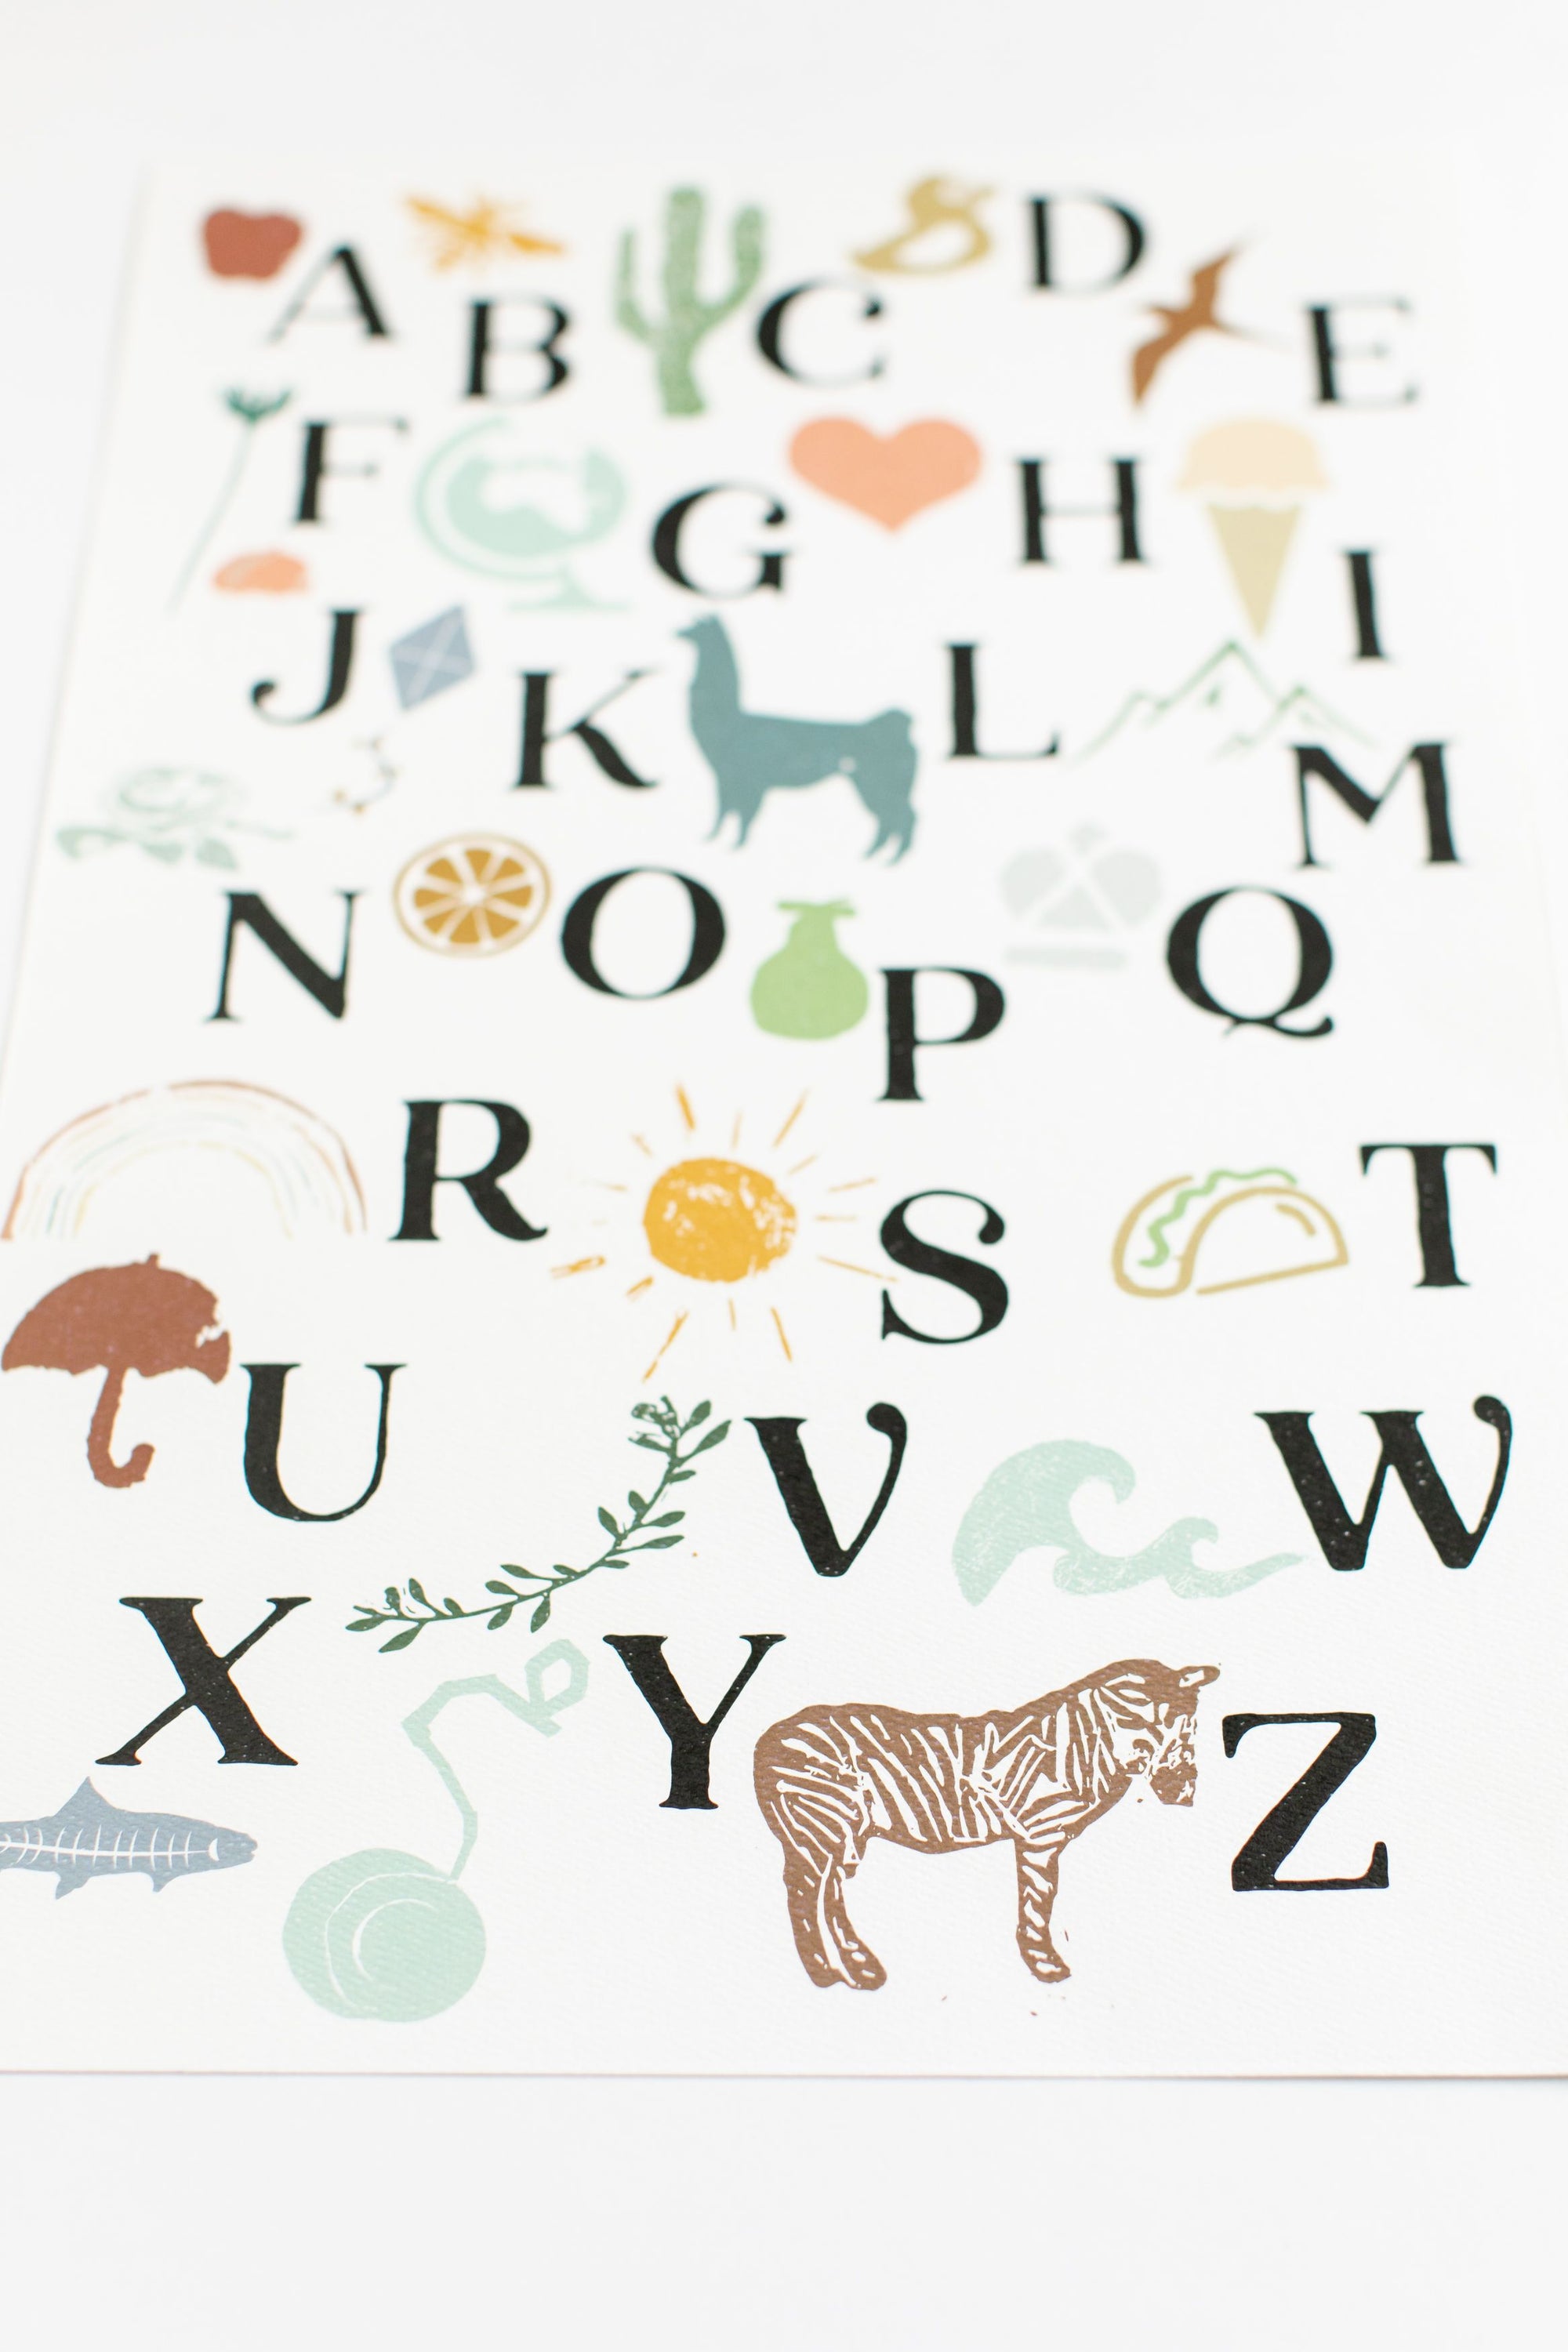 Alphabet Poster | Sanaa Collection - Mercy House Global